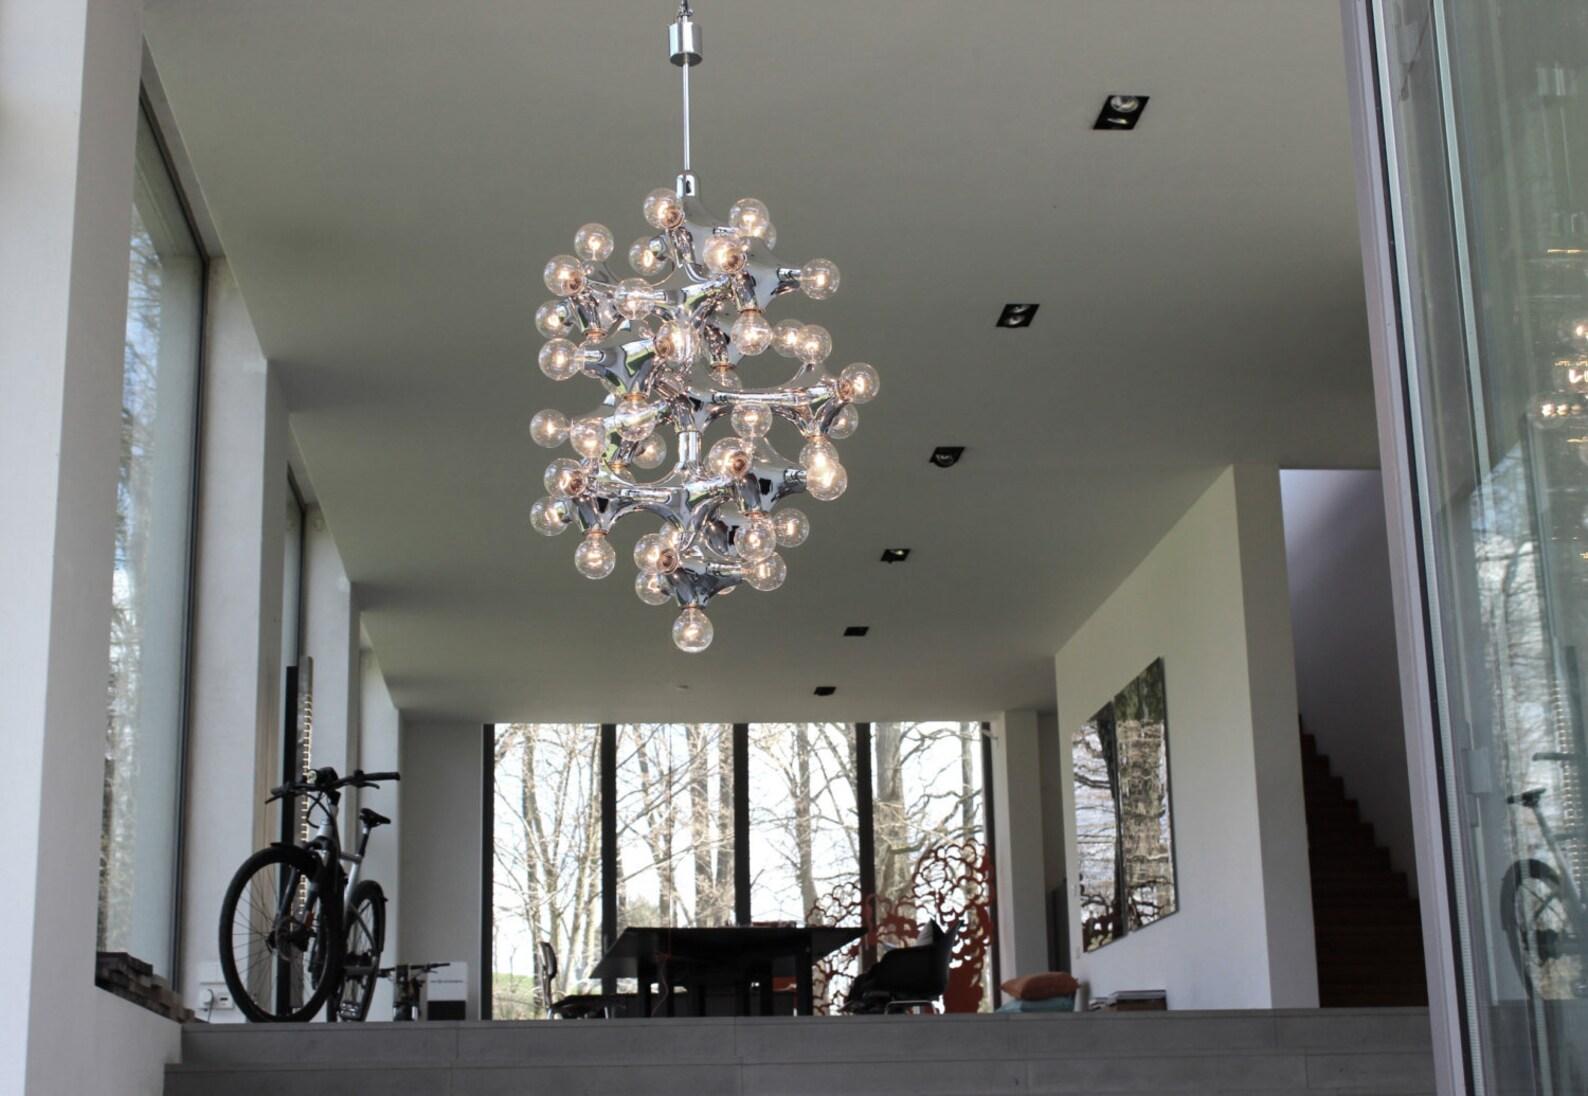 DIAMETER 2,6 FEET / HEIGHT OF THE BODY 3,3 FEET/ TOTAL HEIGHT 4,5 FEET

MONUMENTAL 43 LIGHTS (E27) GERMAN ORGANIC MOLECULES CHANDELIER MIRRORED 1960s-1970s

Exceptional architecture need special solutions for lighting! This extraordinary